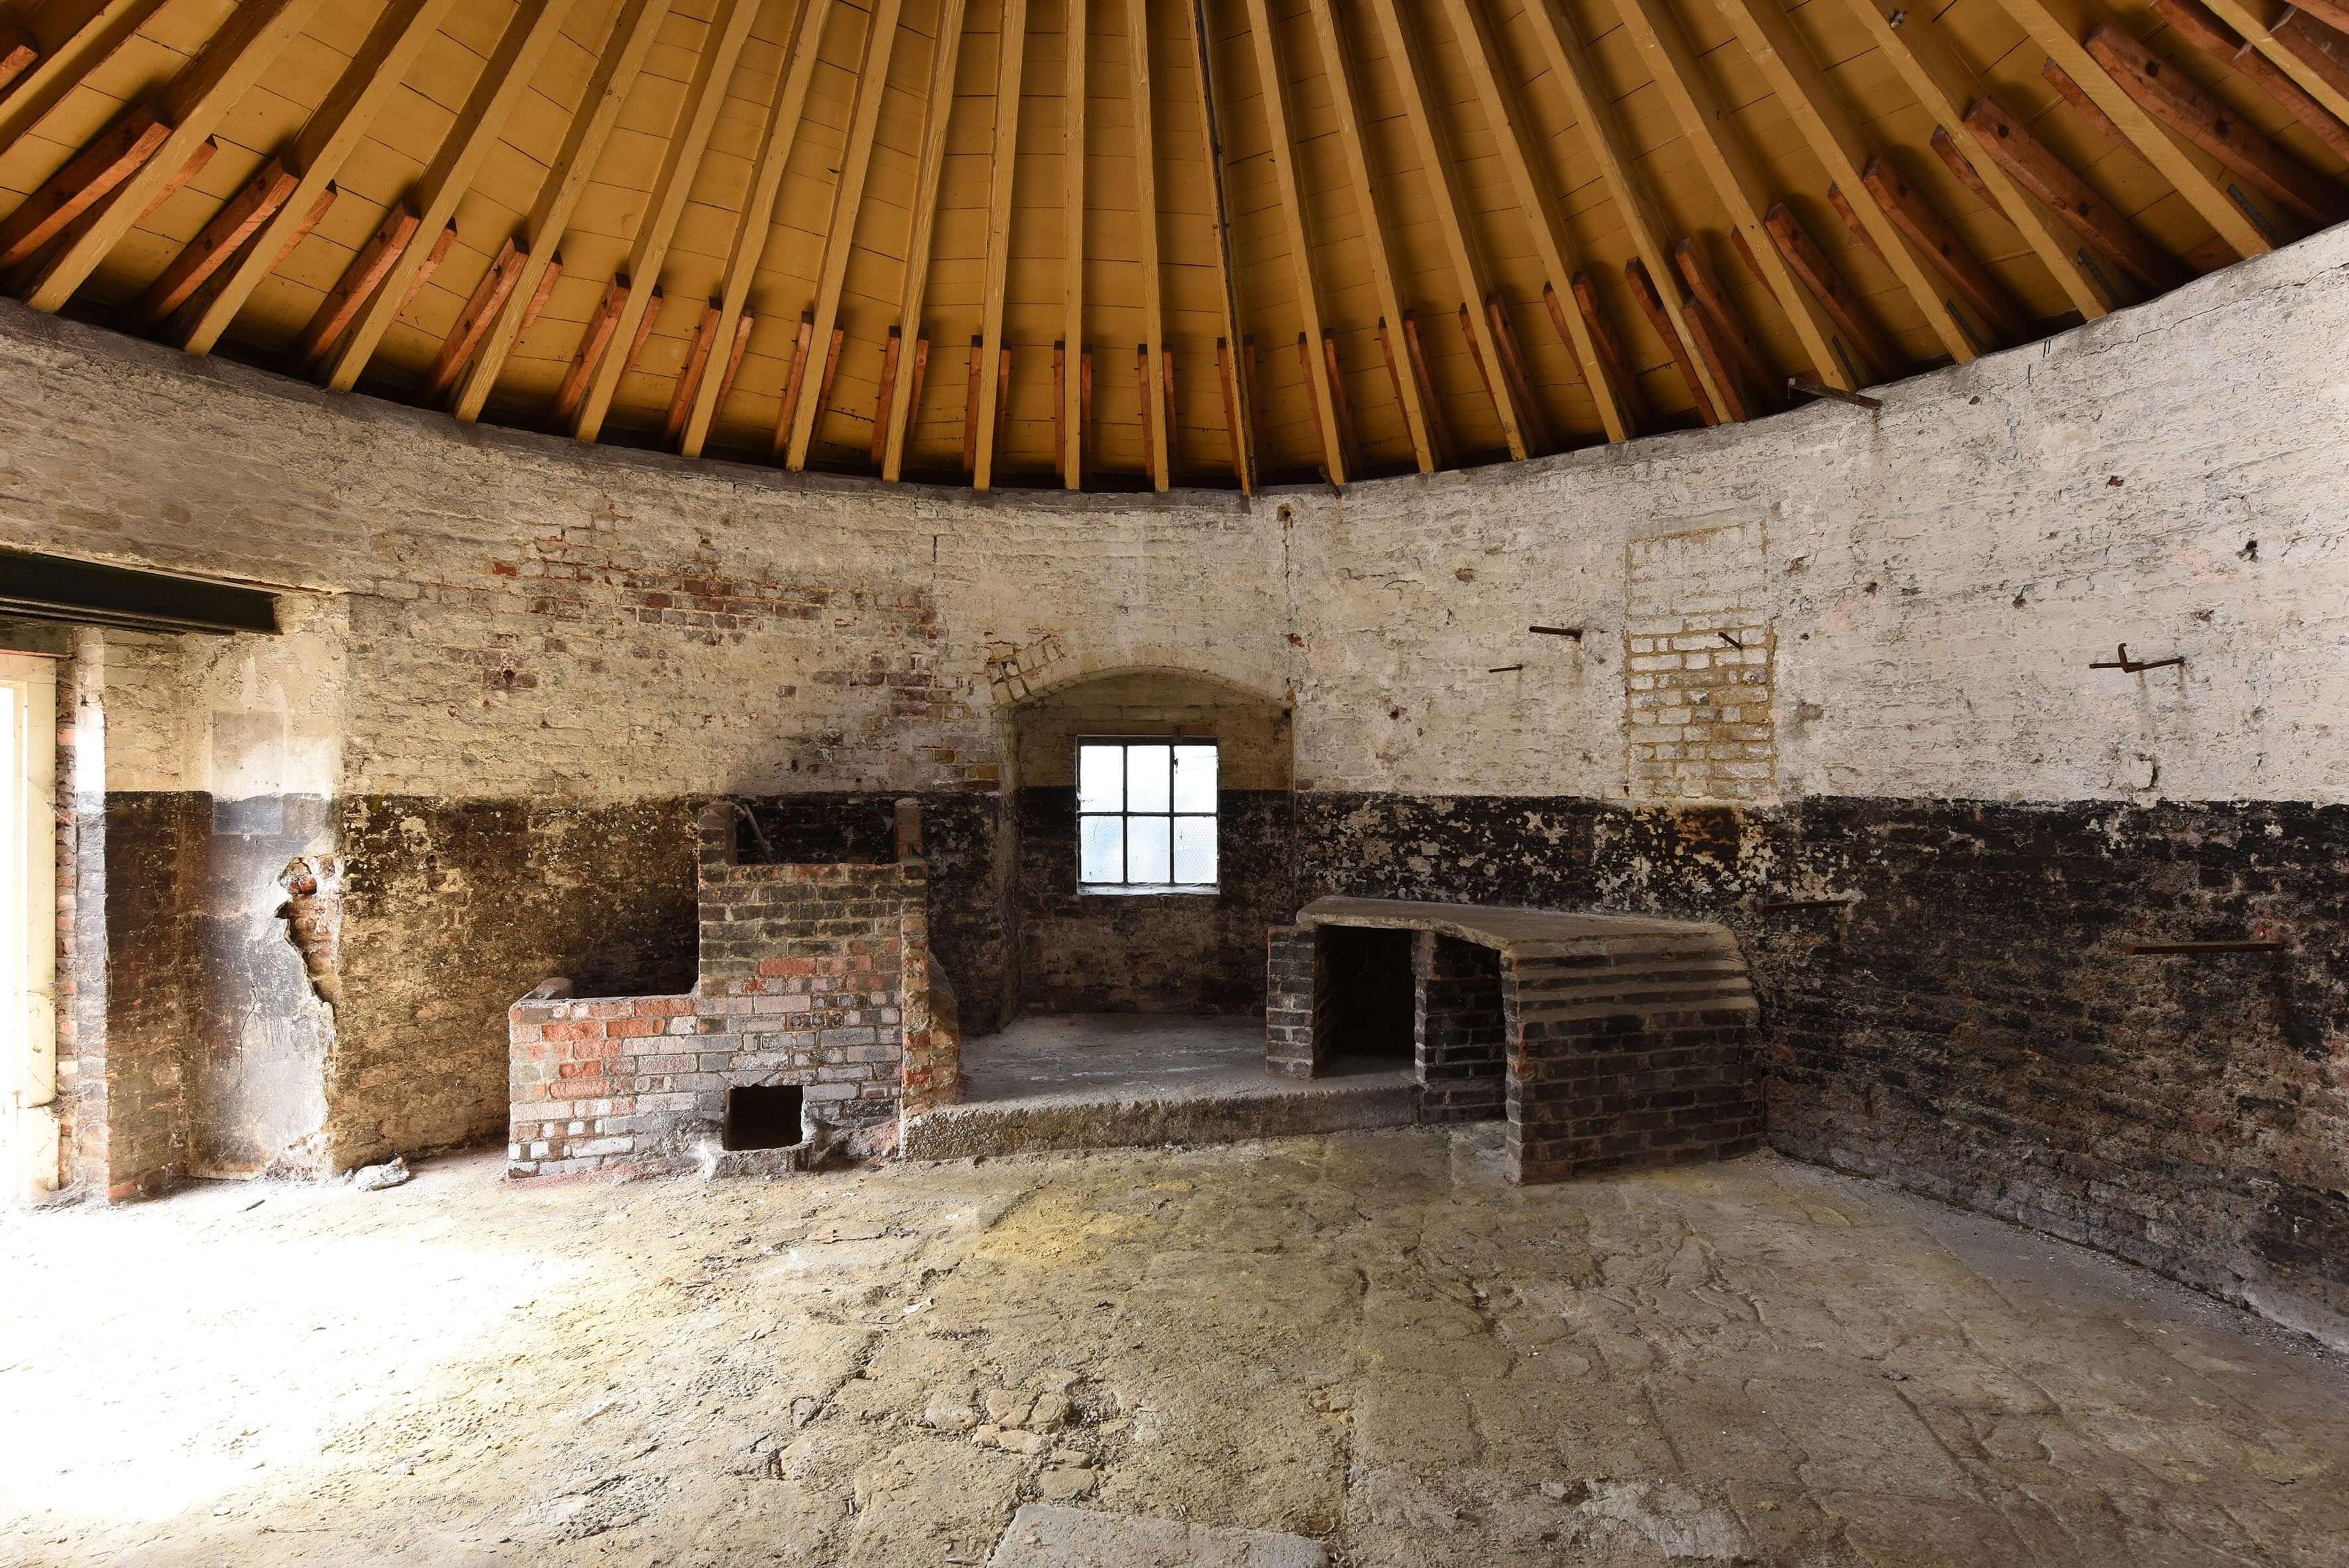 Inside a windmill base with brick walls and a wooden ceiling.